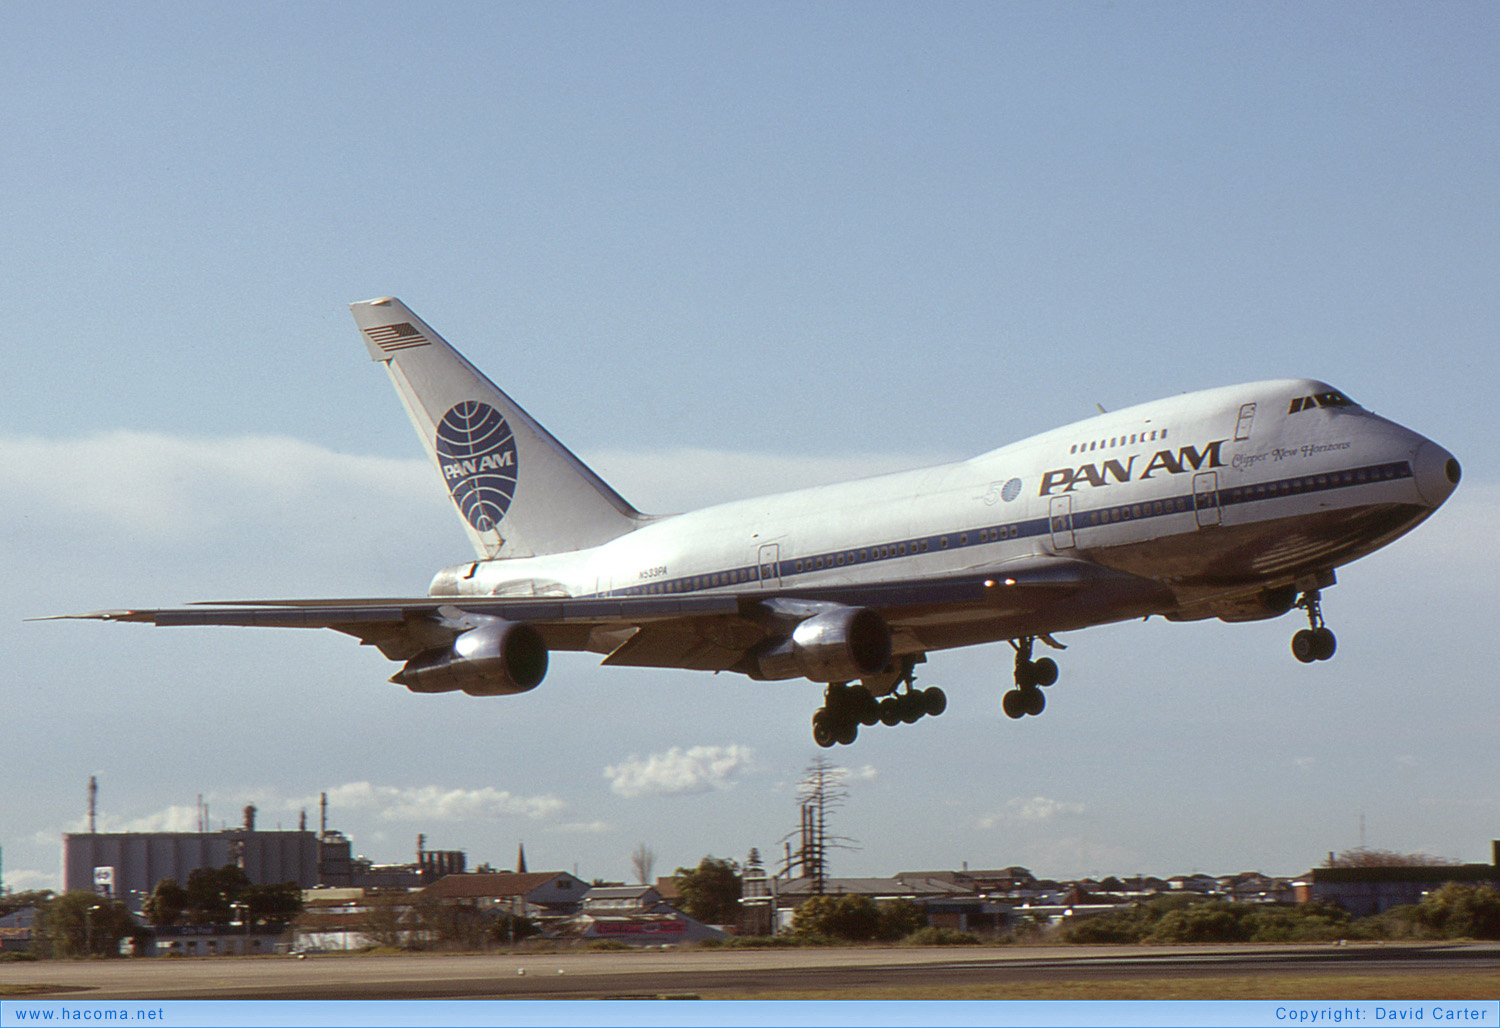 Foto von N533PA - Pan Am Clipper Freedom / Liberty Bell / New Horizons / Young America / San Francisco - Kingsford Smith International Airport - 09.1984